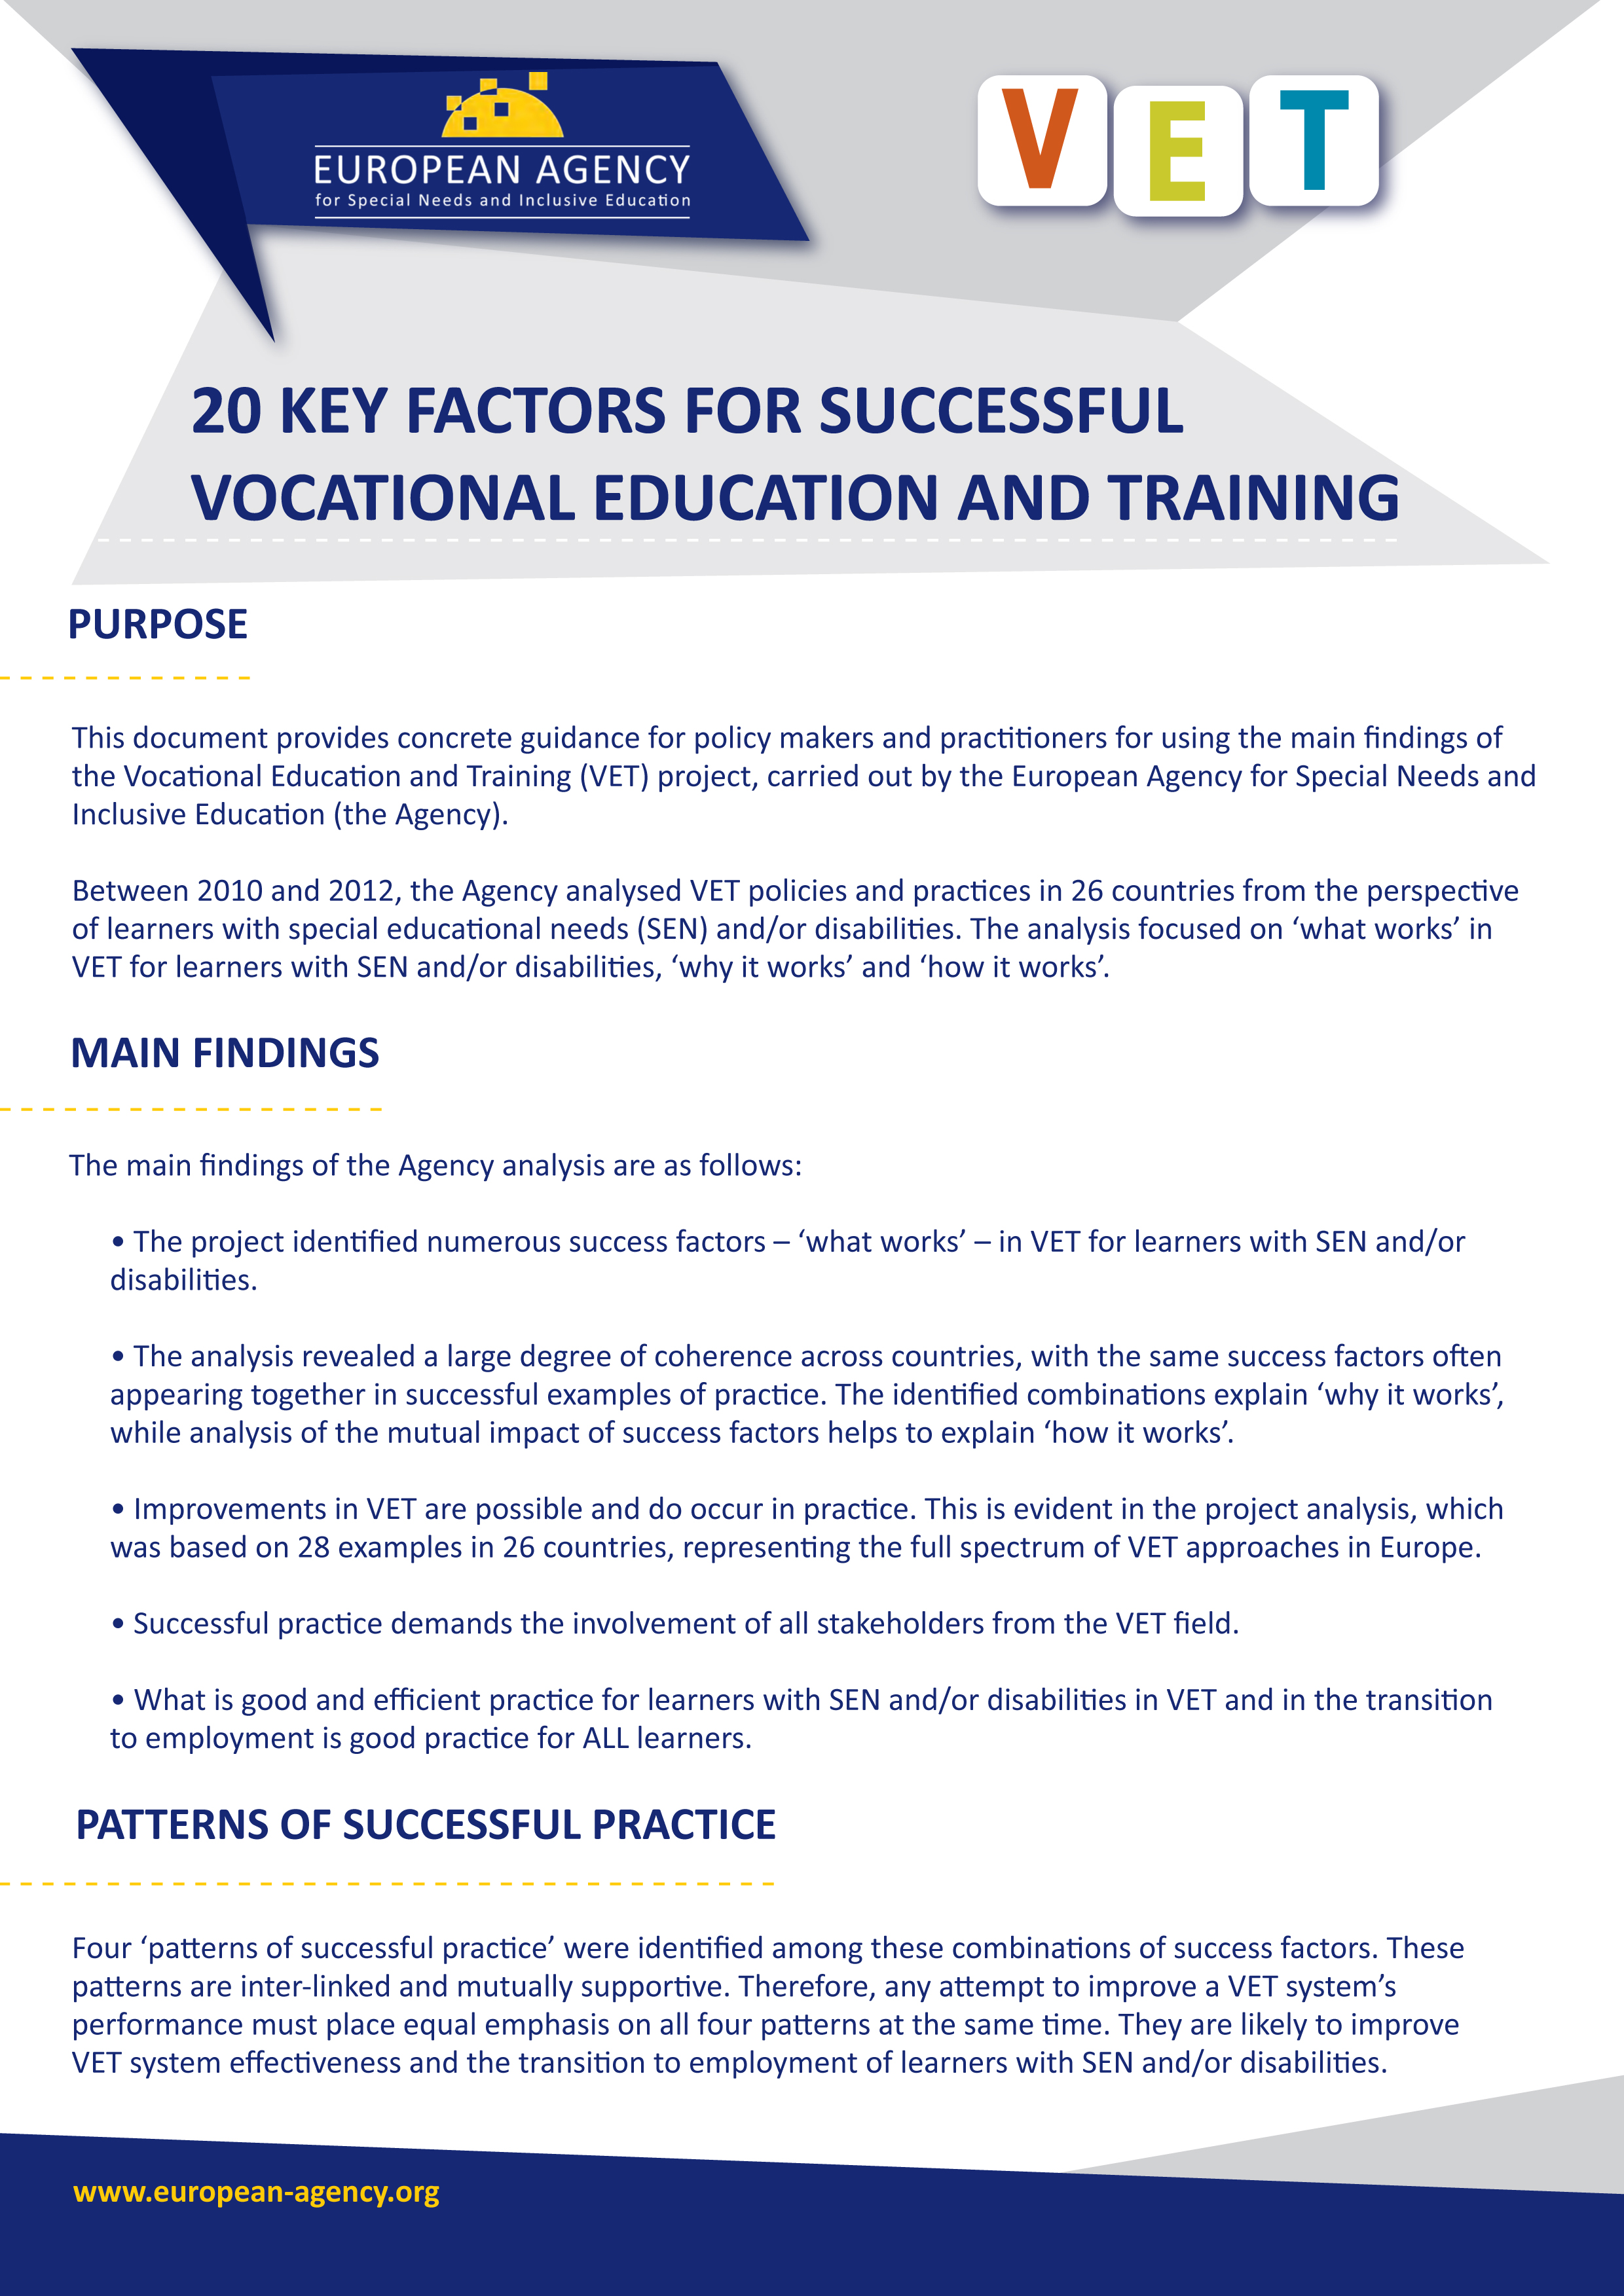 20 Key Factors for Successful Vocational Education and Training